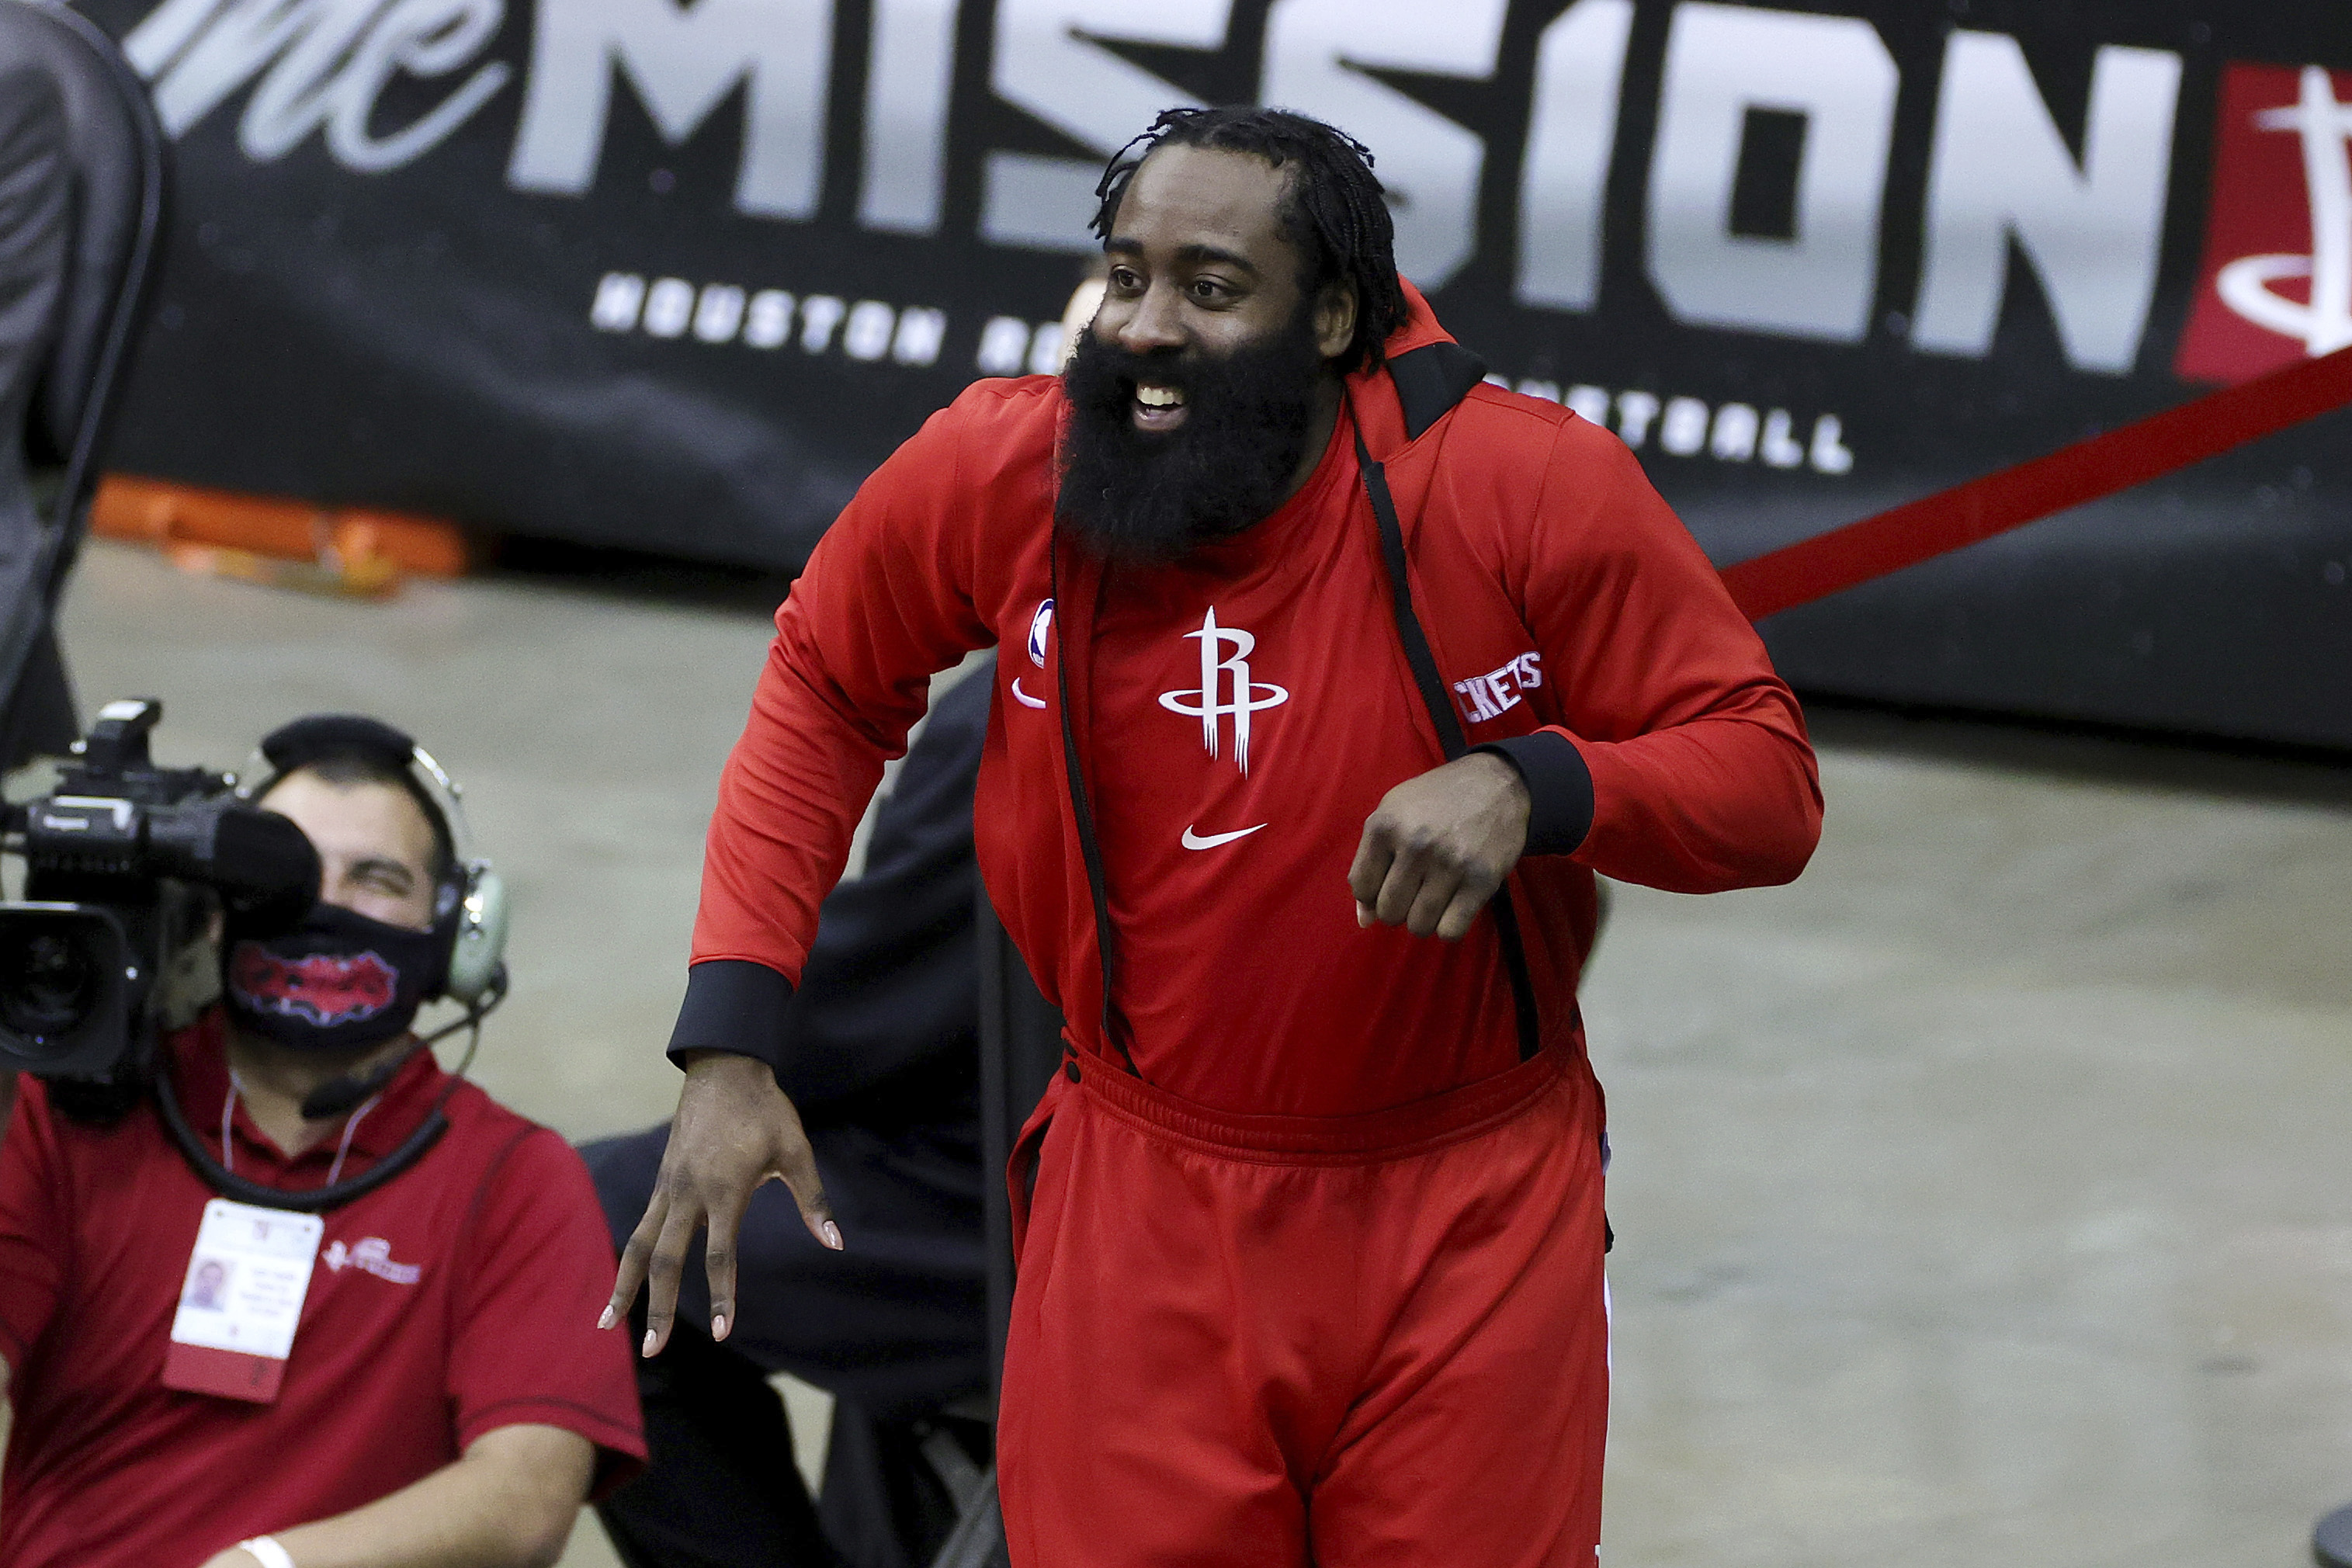 50,000 fine for James Harden – This Is Basketball